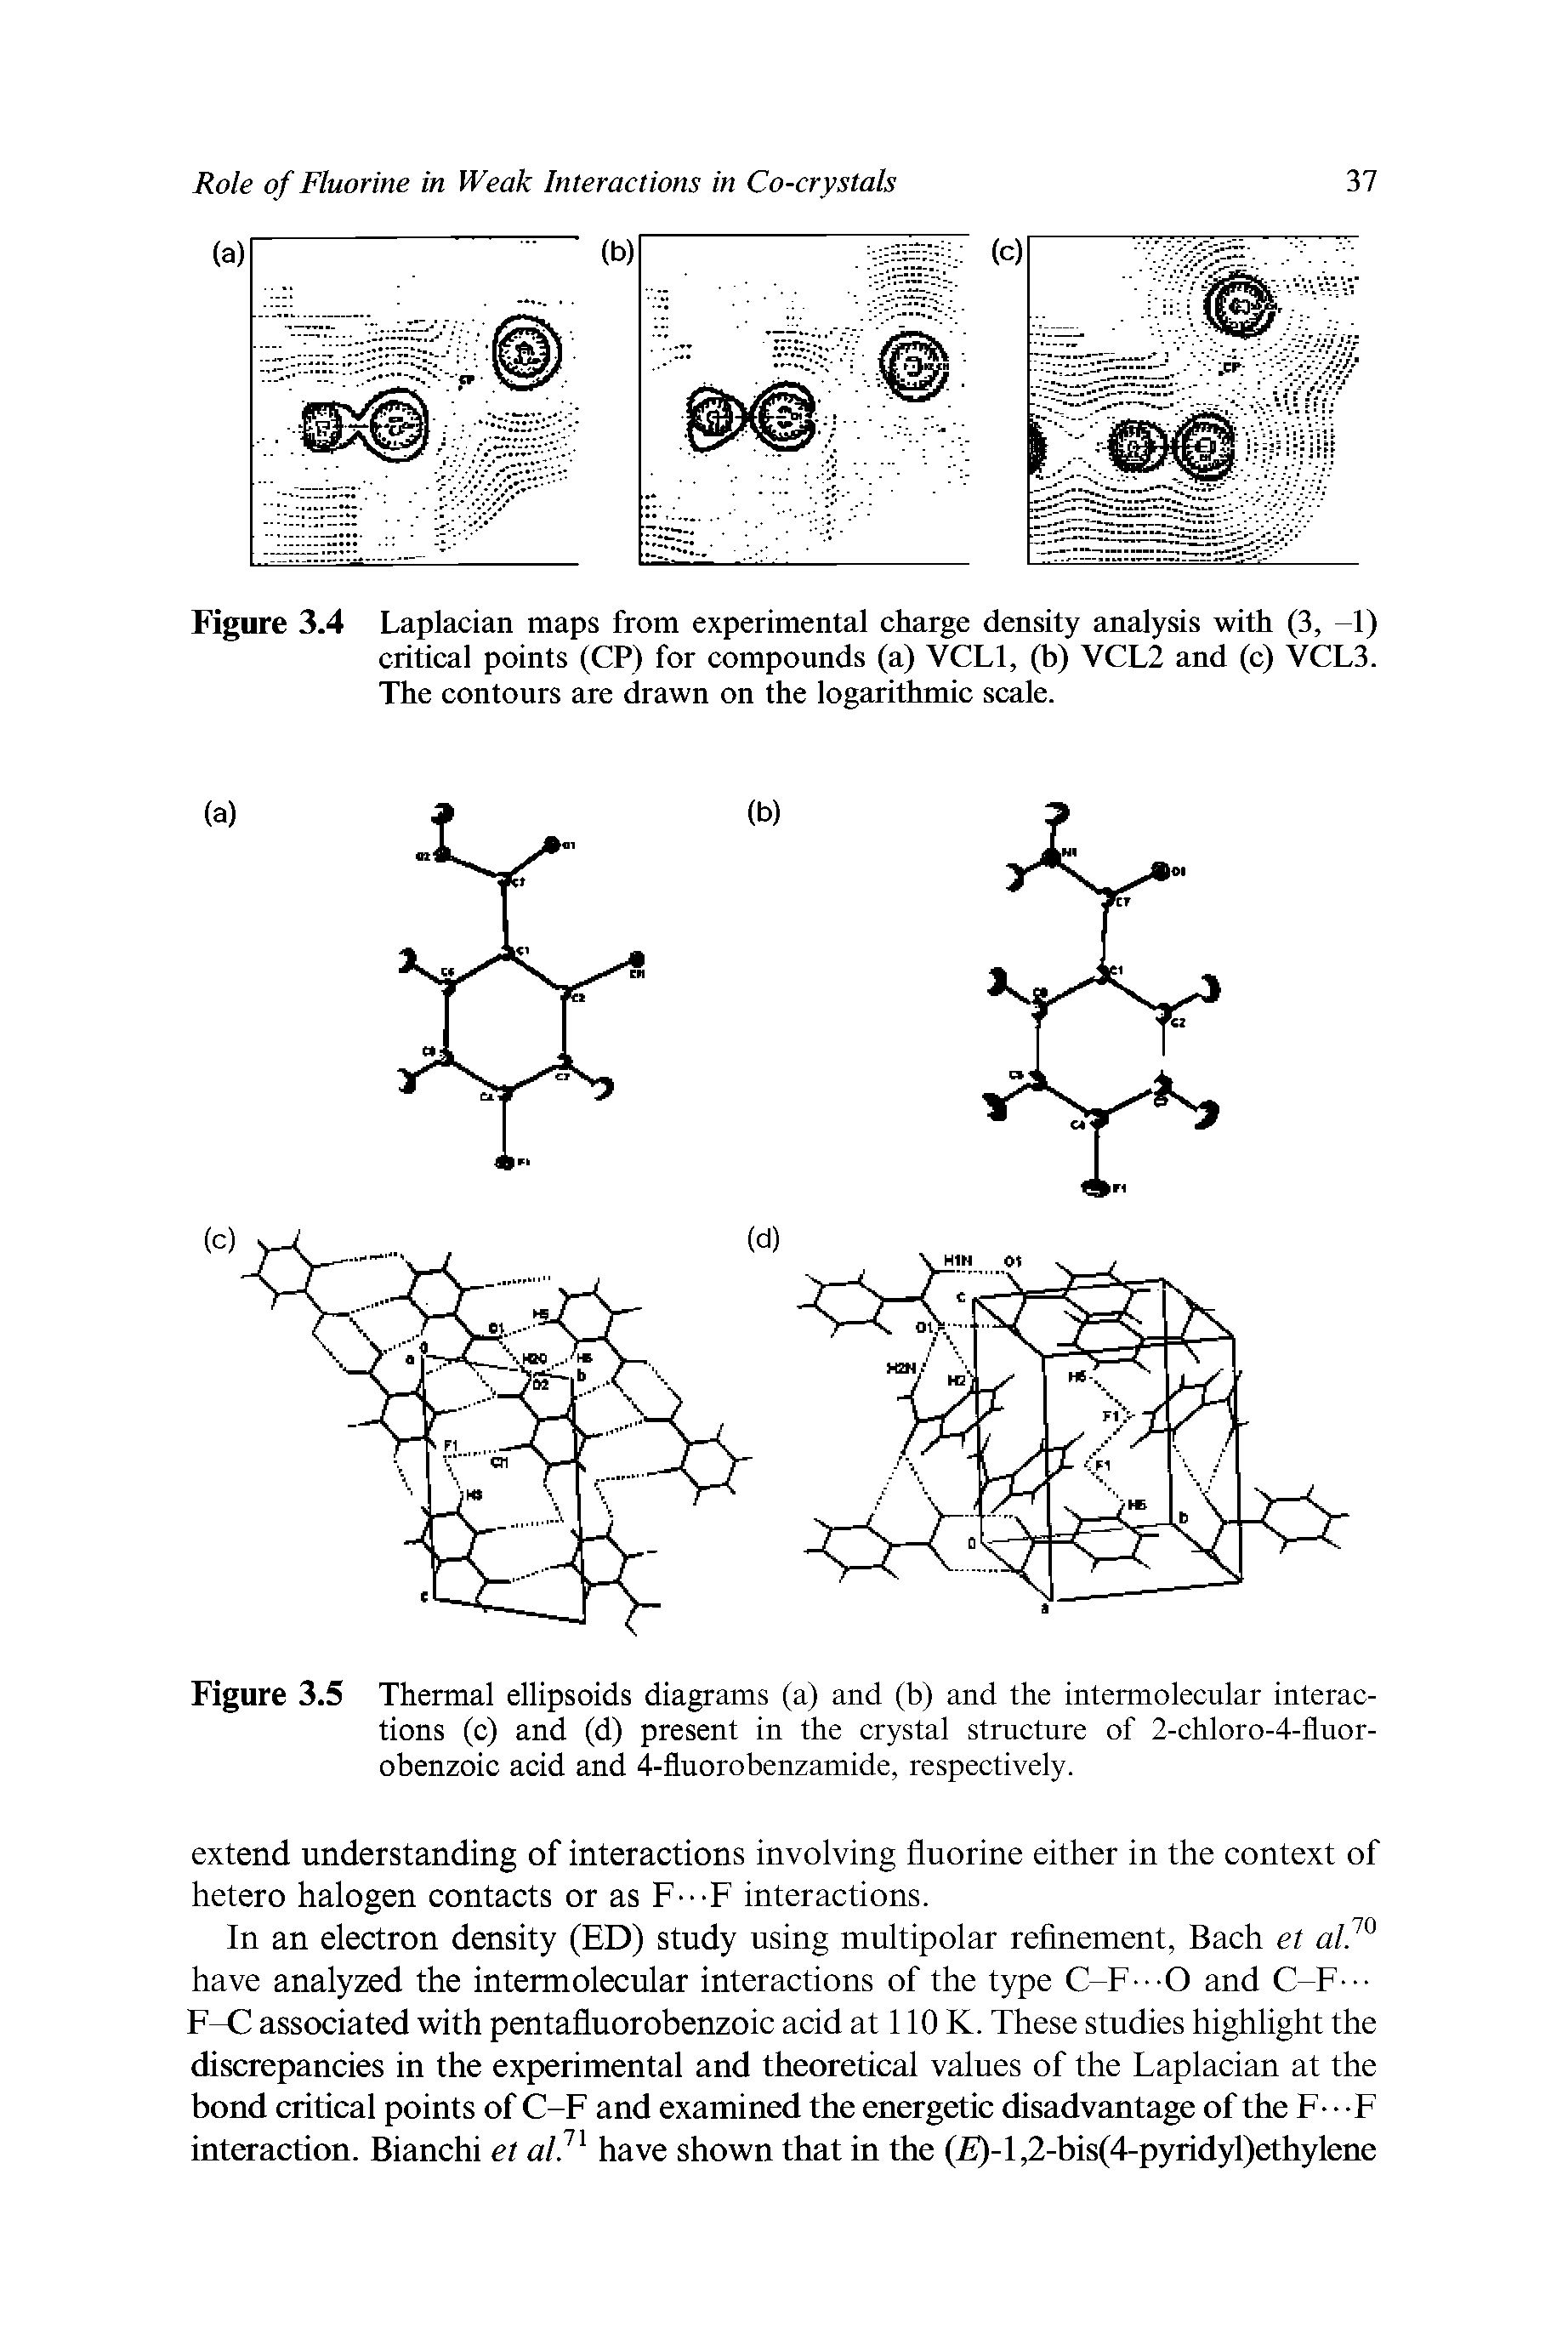 Figure 3.4 Laplacian maps from experimental charge density analysis with (3, -1) critical points (CP) for compounds (a) VCLl, (b) VCL2 and (c) VCL3. The contours are drawn on the logarithmic scale.